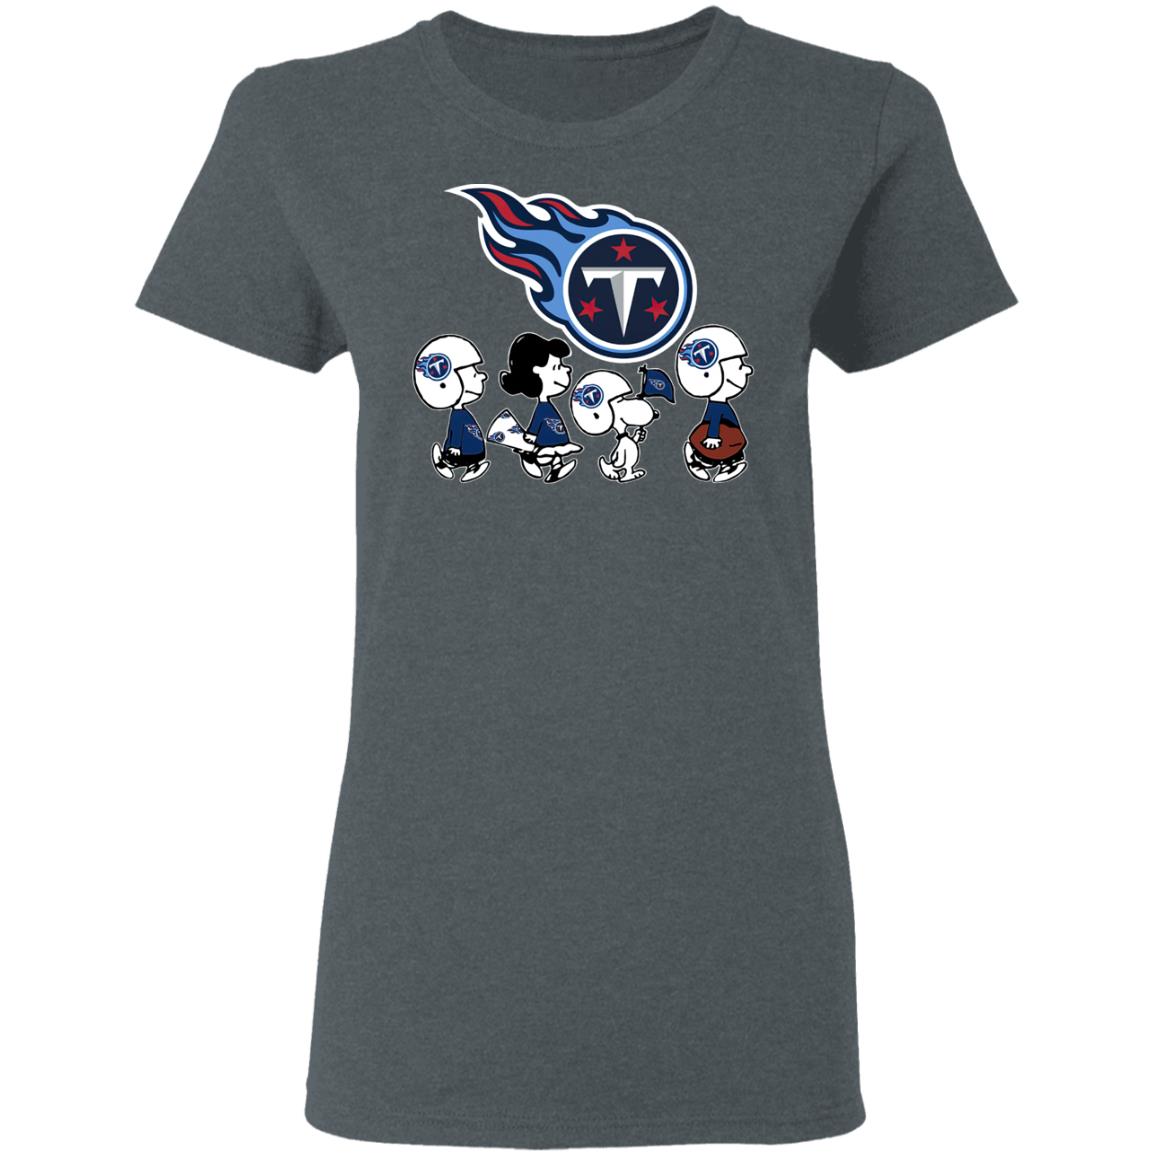 Shirt Peanuts Snoopy Cheer NFL For Tennessee And Friends Titans The The